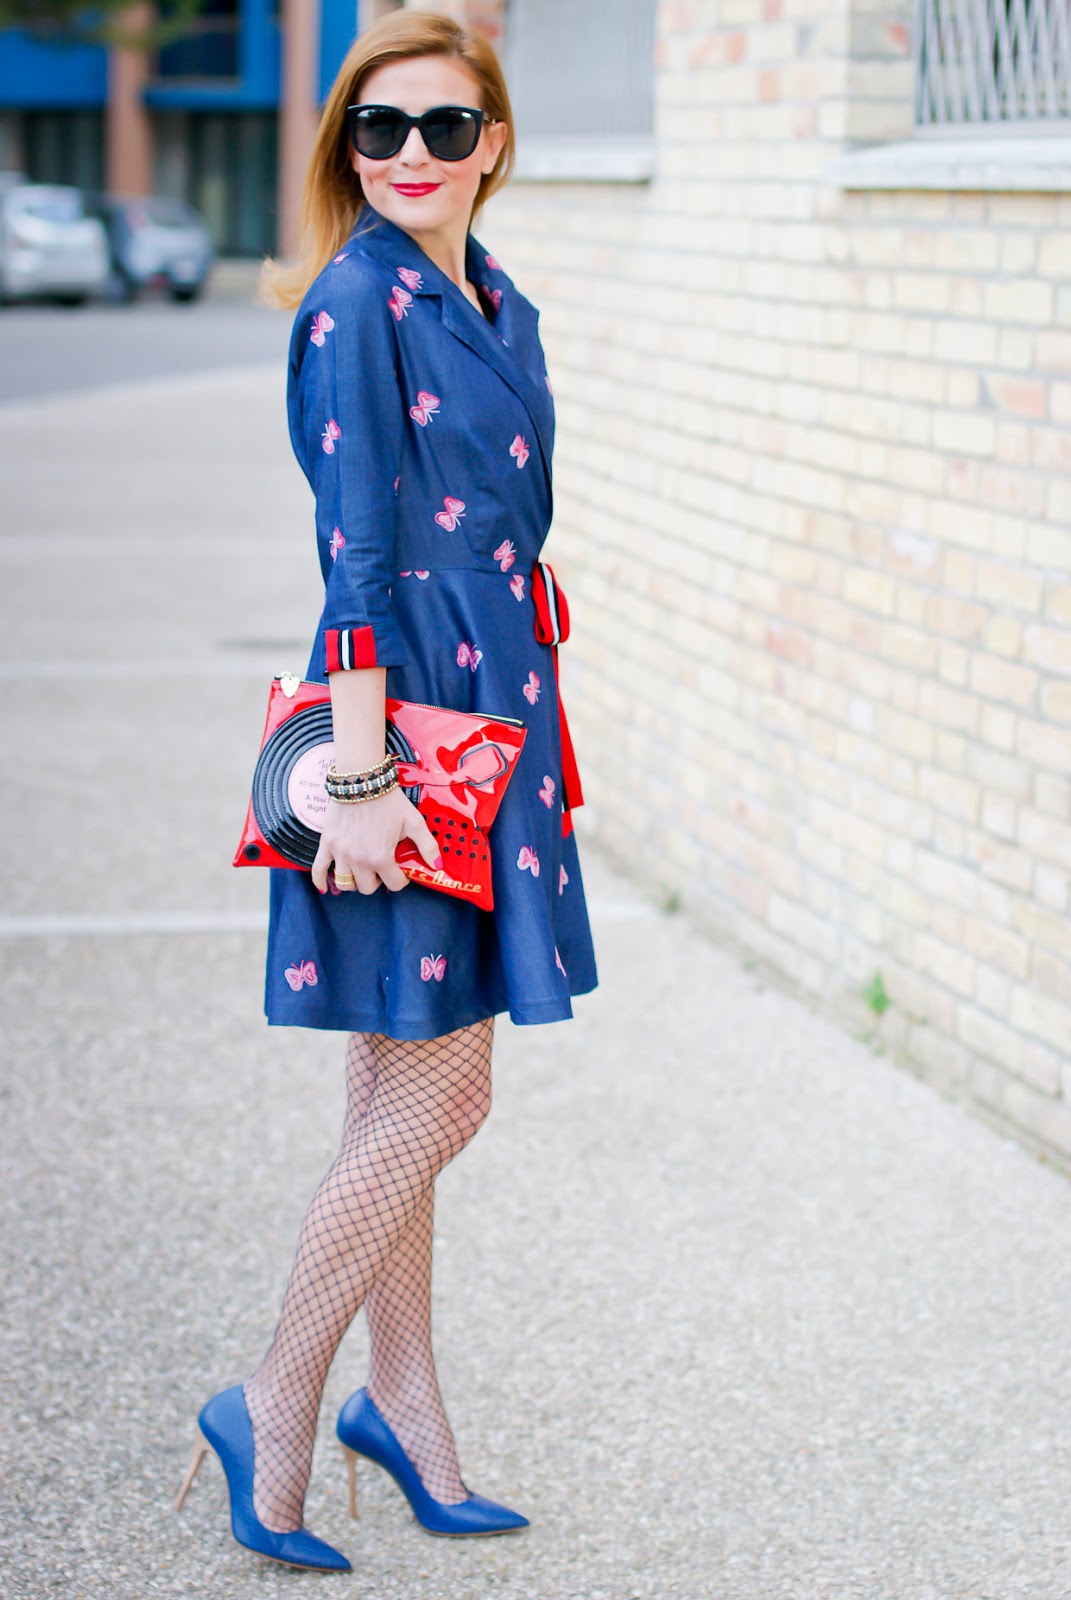 Butterfly denim dress from Metisu on Fashion and Cookies fashion blog, fashion blogger style